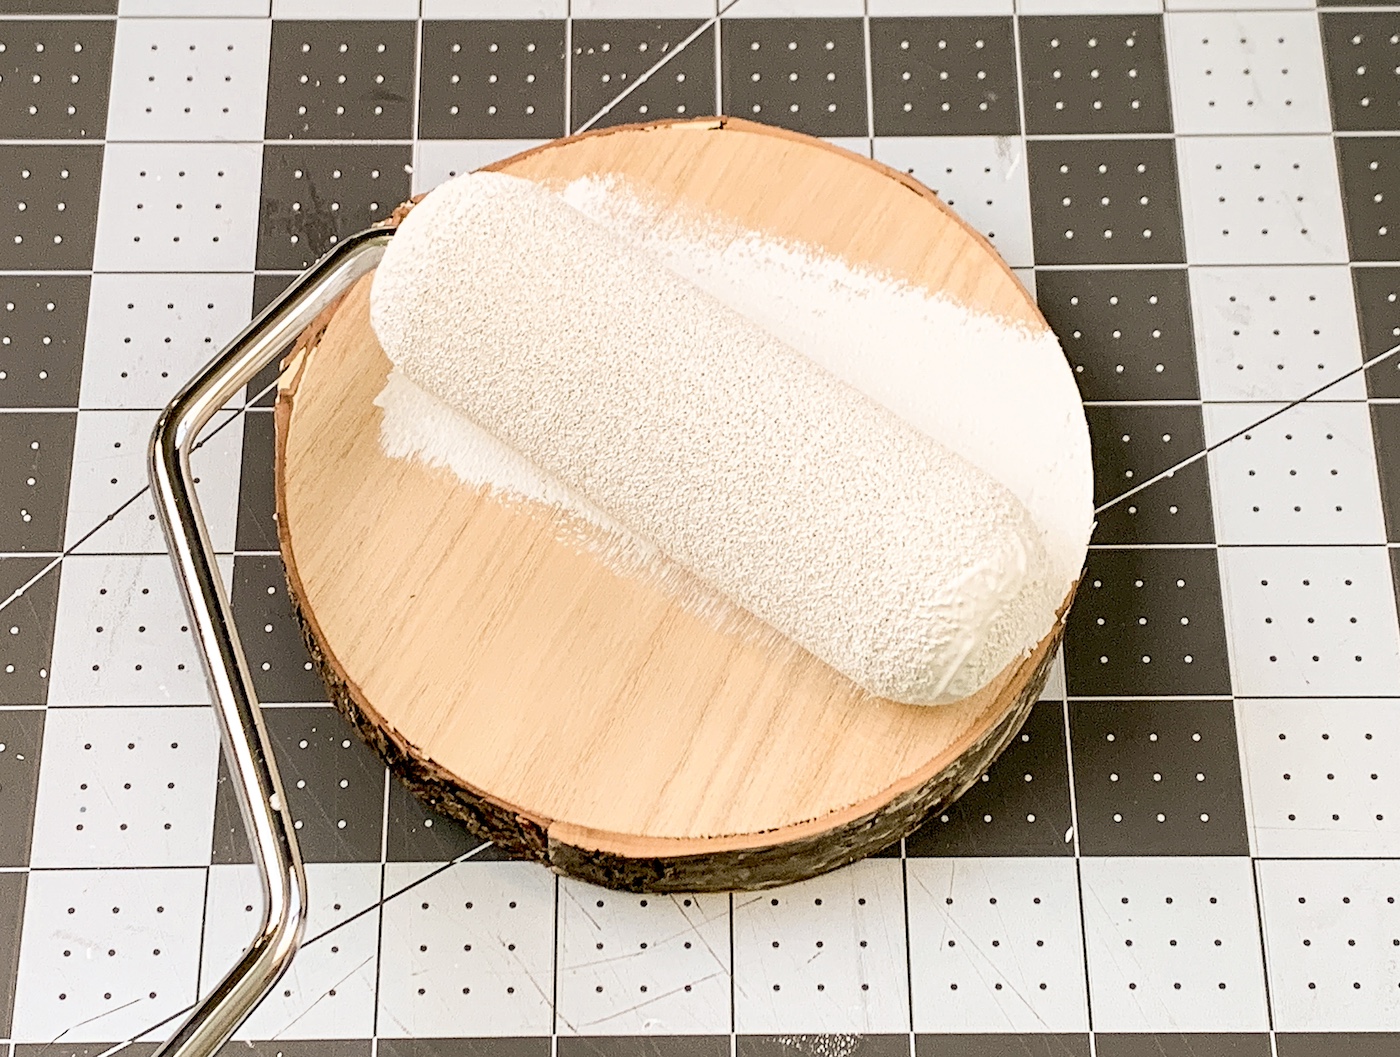 Painting a wood slice with white paint